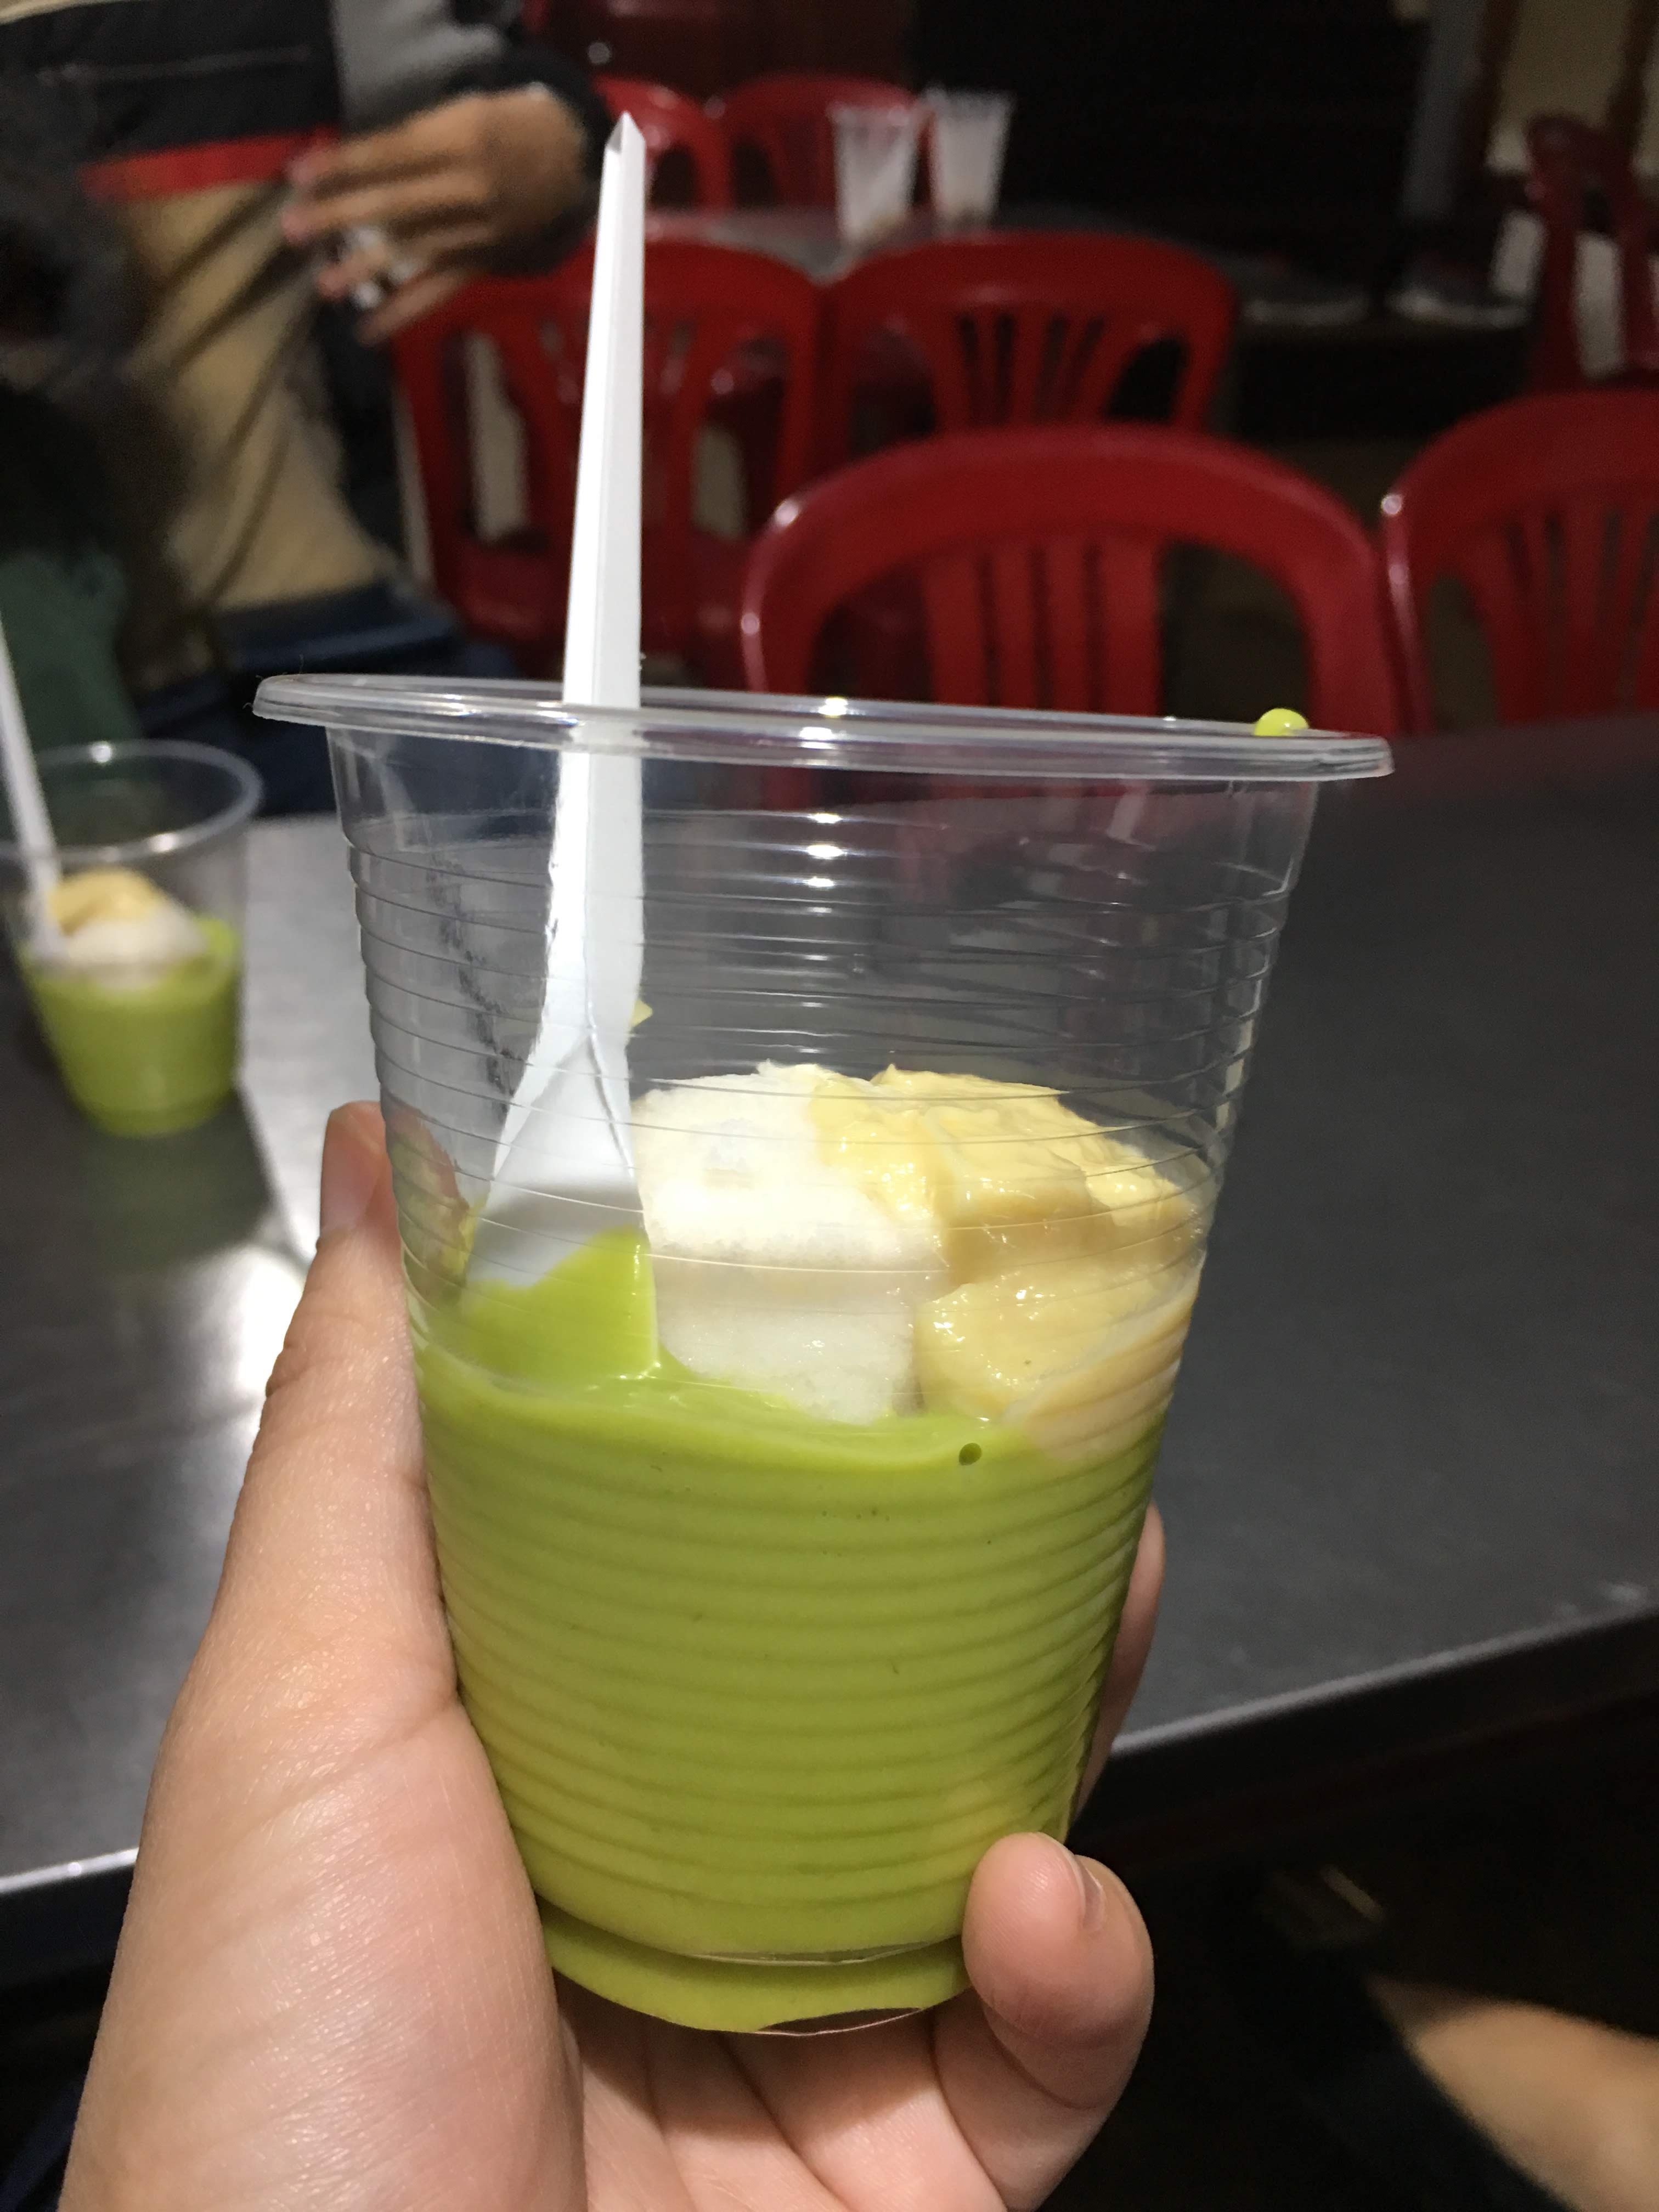 A file photo shows 'kem bơ', a signature delicacy in the Central Highlands City of Da Lat which is a mixing of avocado smoothie and ice cream, taken at a shop in Da Lat. Photo: DOng Nguyen/ Tuoi Tre News